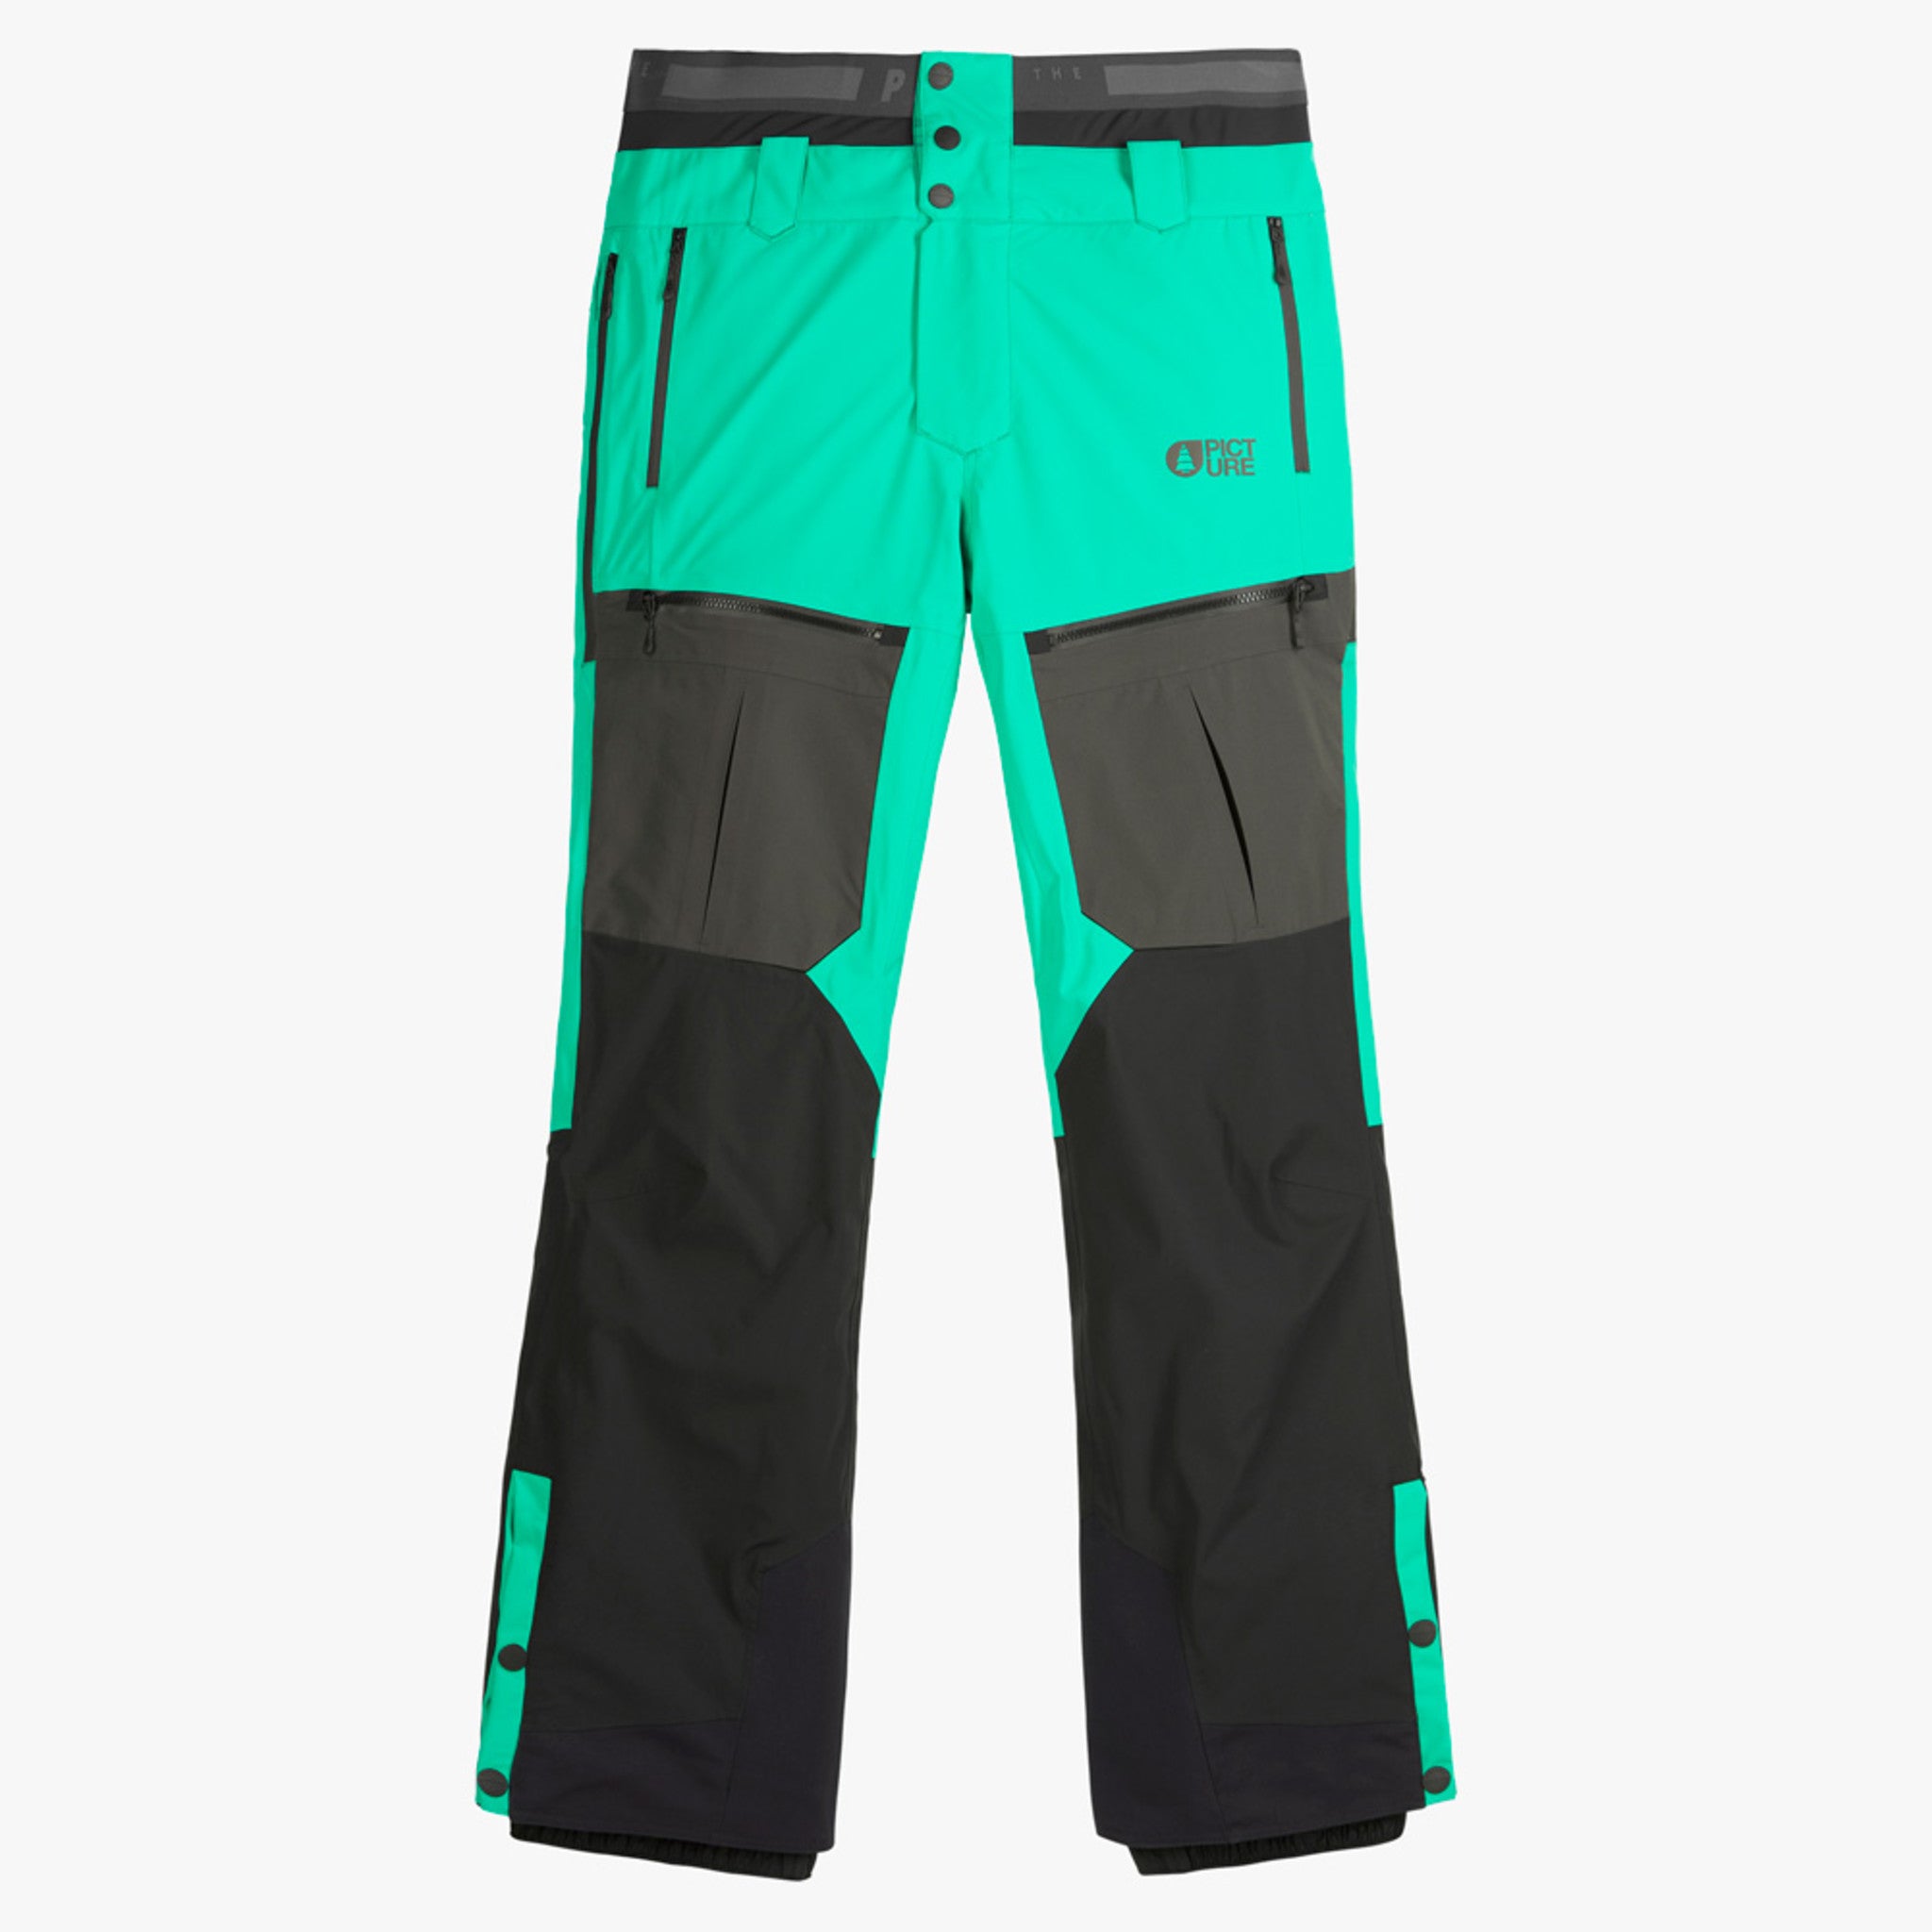 Picture Naikoon Men's Pants, Alpine / Apparel